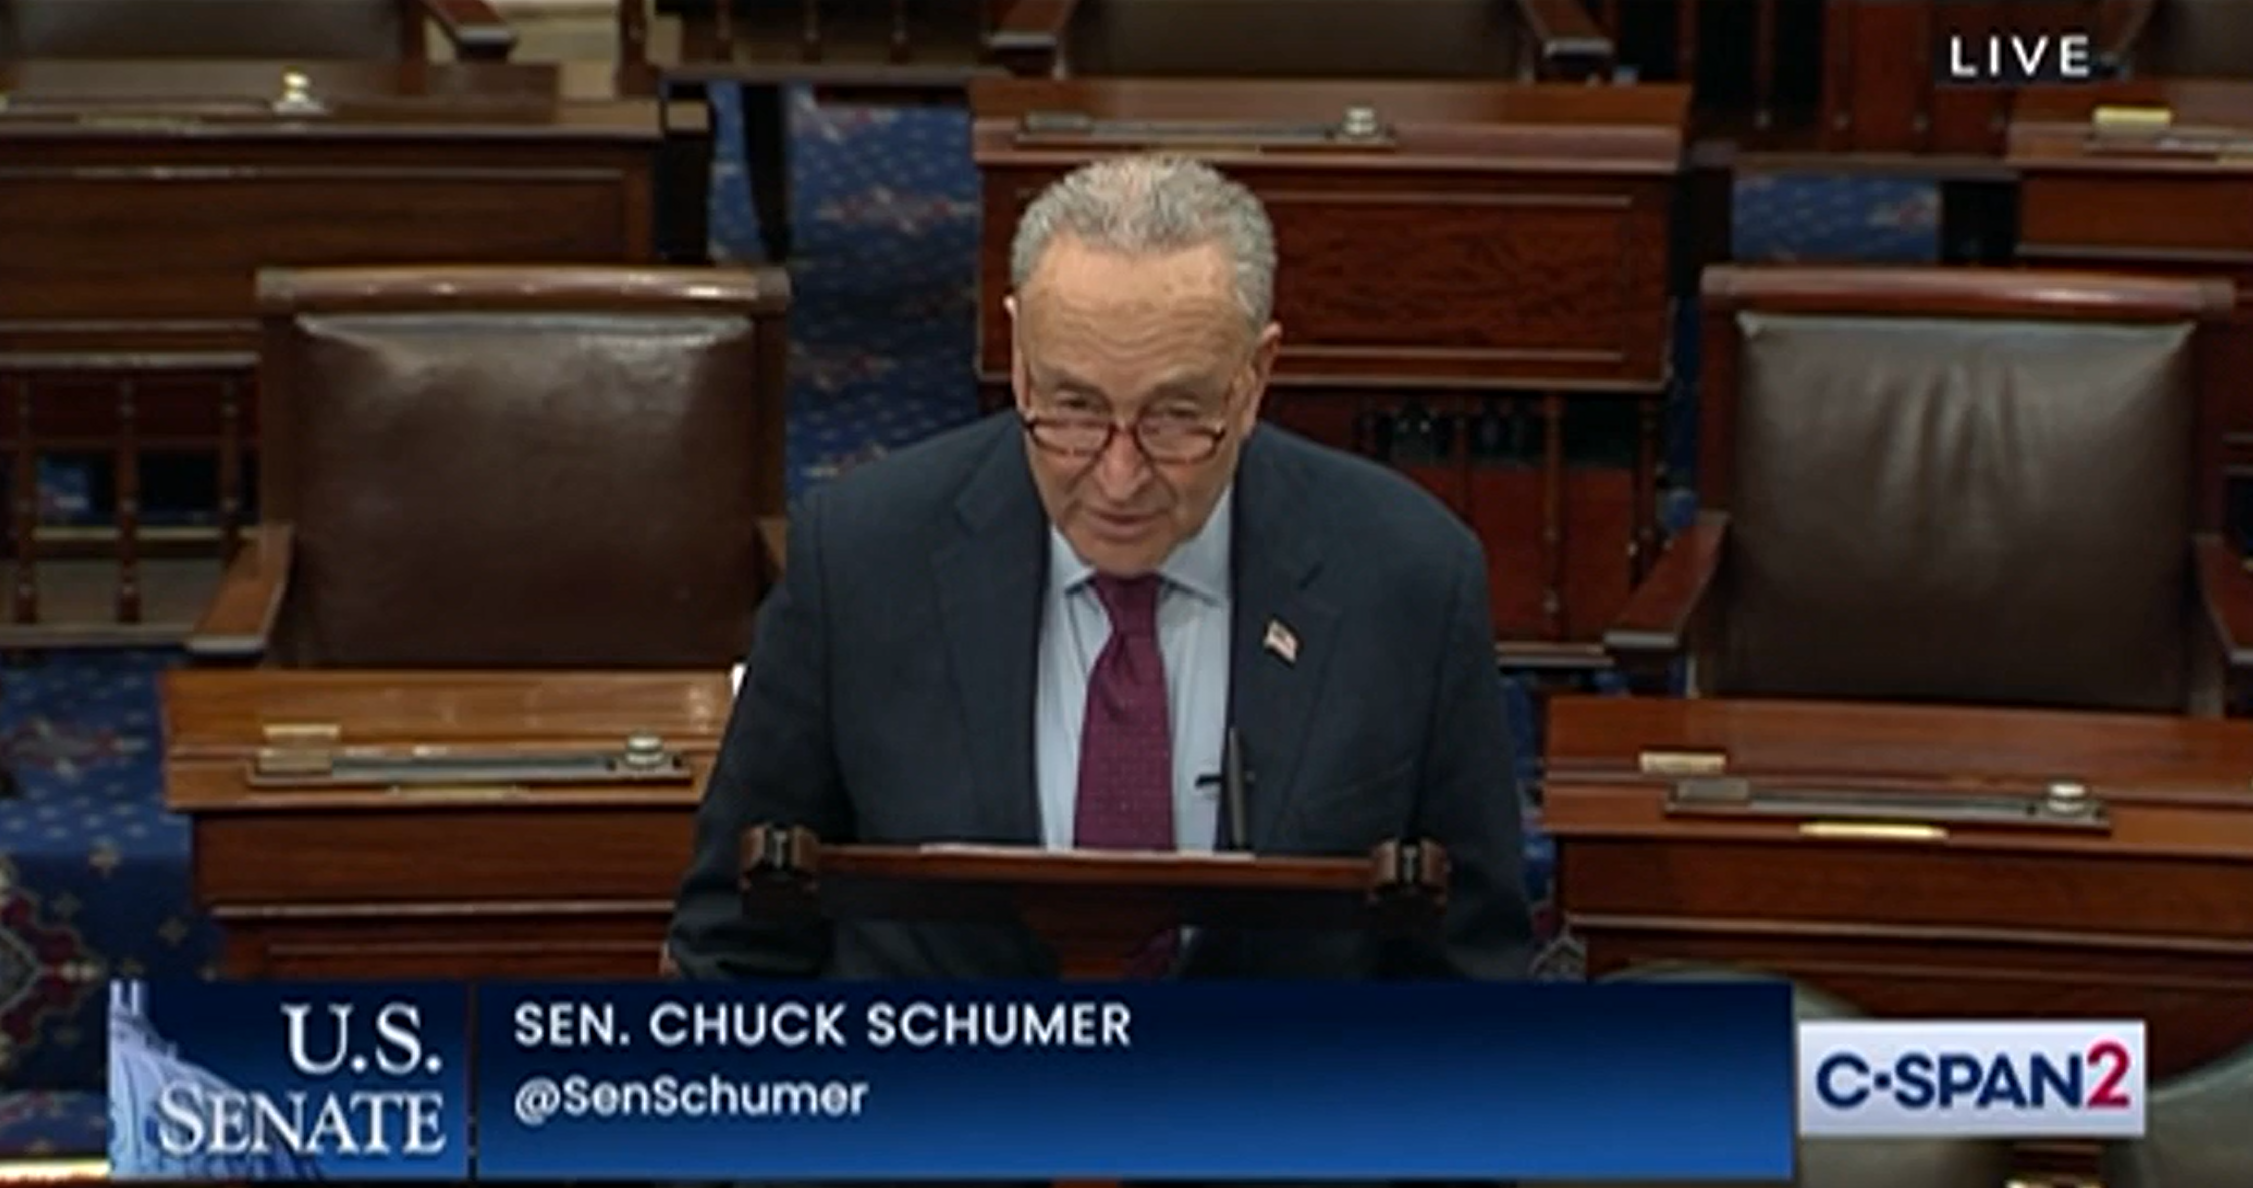 Schumer to Invite Netanyahu to Address Congress After Calling for His Ouster